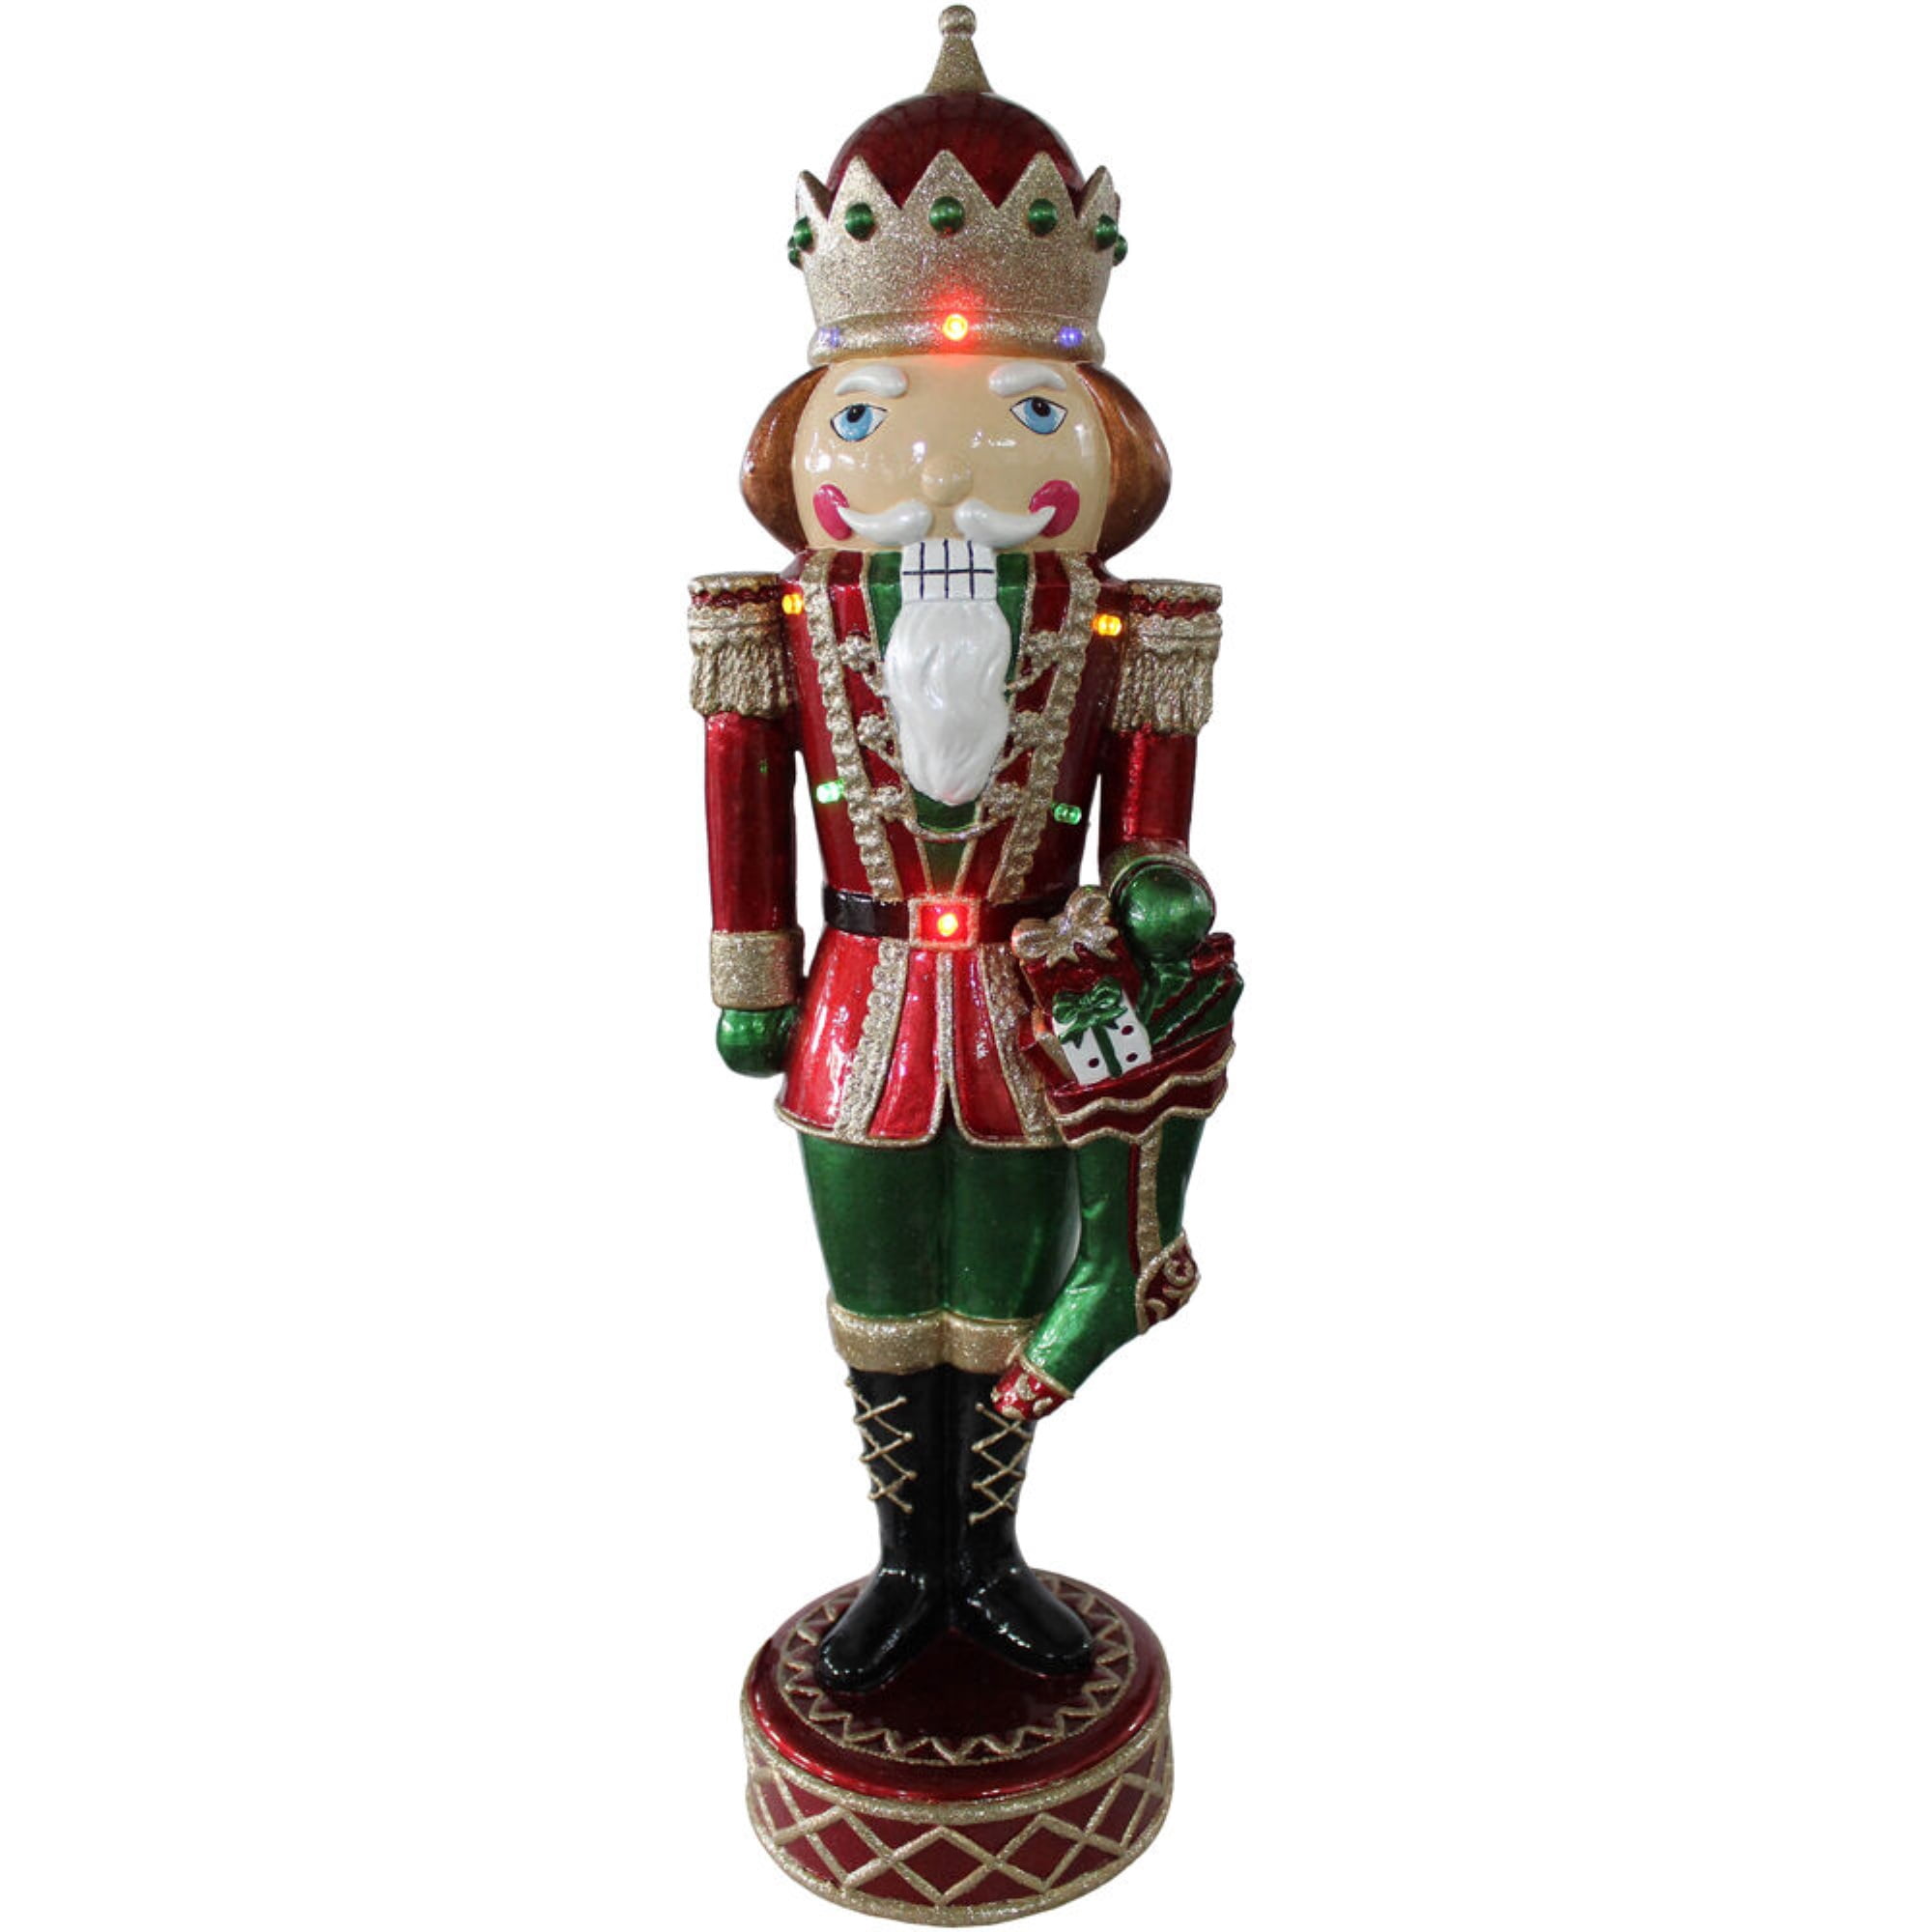 Details about   New & Cute! Nutcracker Soldier Christmas Ornament Wooden Pull String Toy 